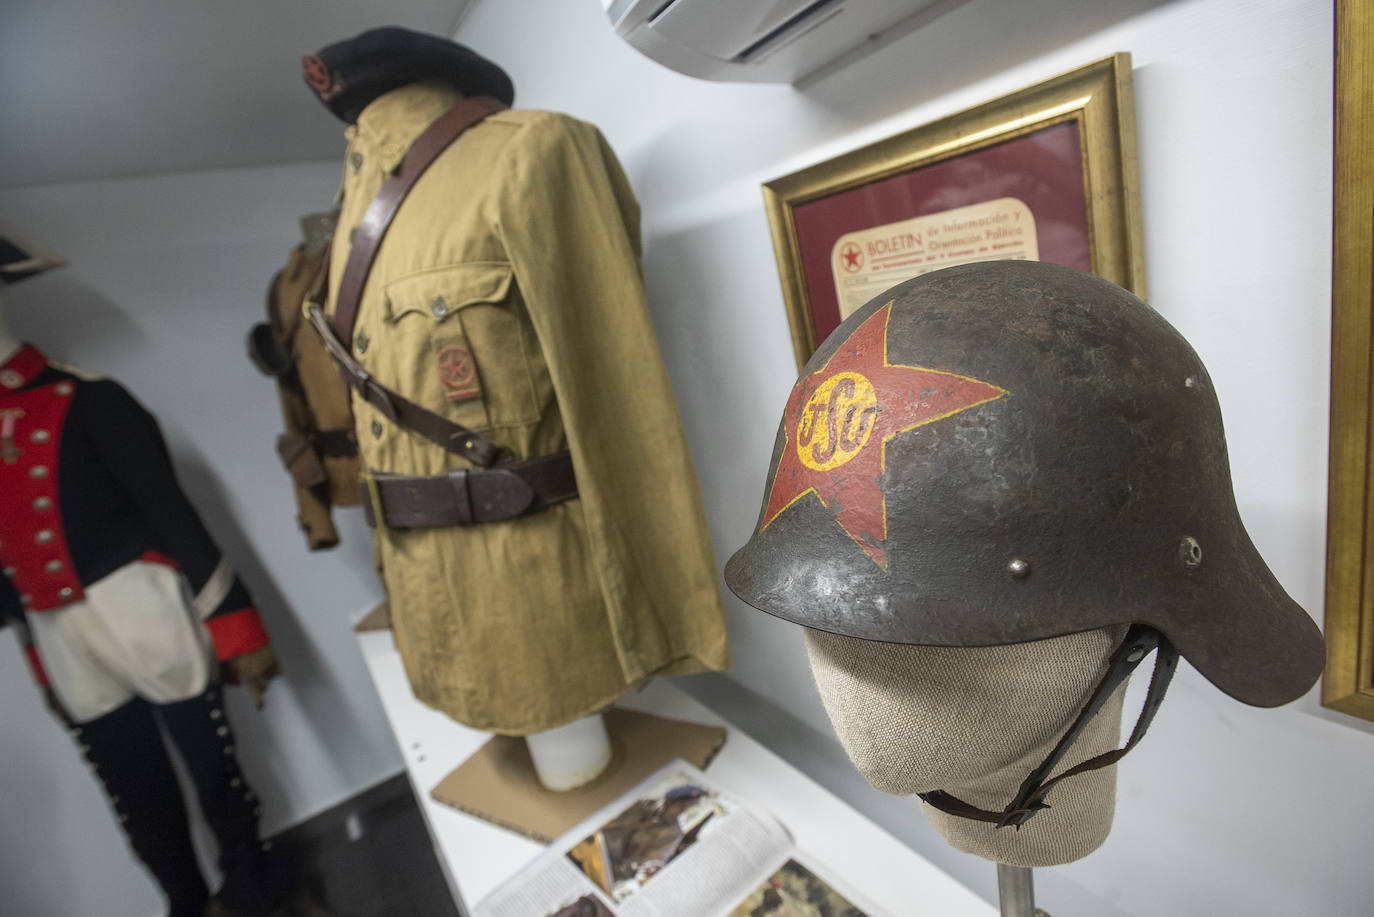 In a building in Plaza San Francisco in Malaga is one of the most important military uniforms collection in Spain . 